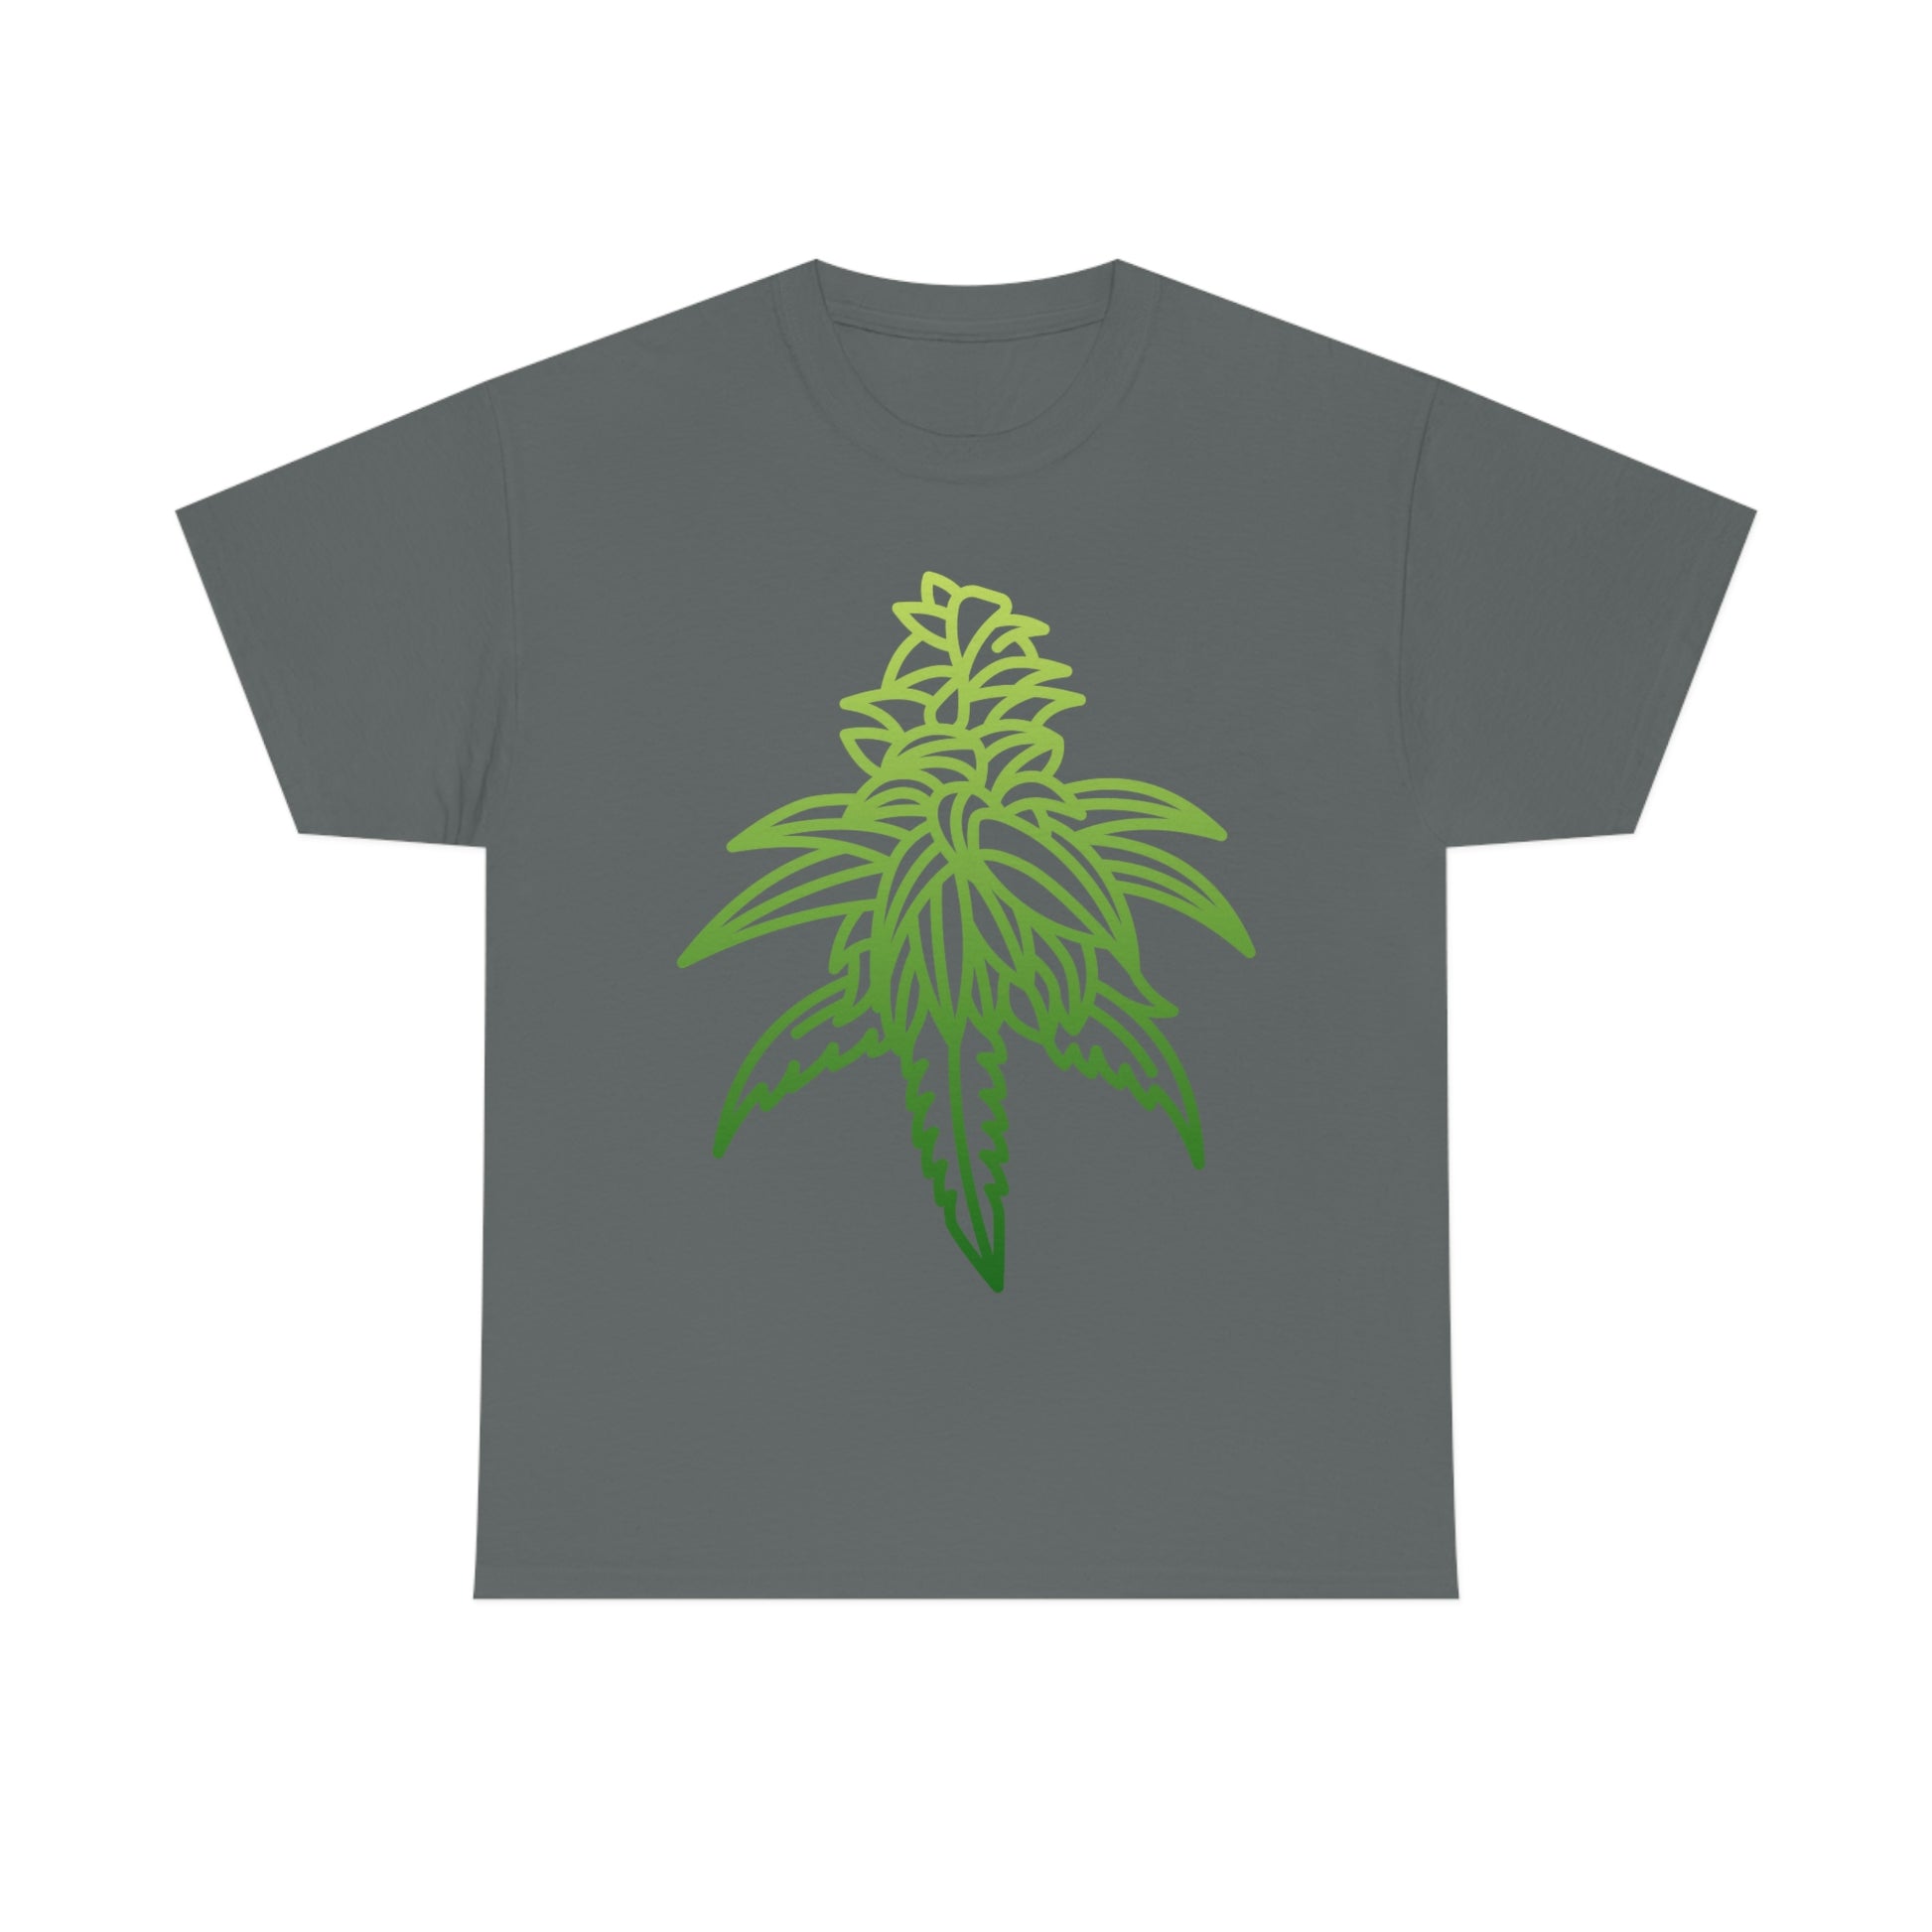 A sour diesel cannabis tee that shows a gradient outline of a cannabis nug going from dark green to lime green.